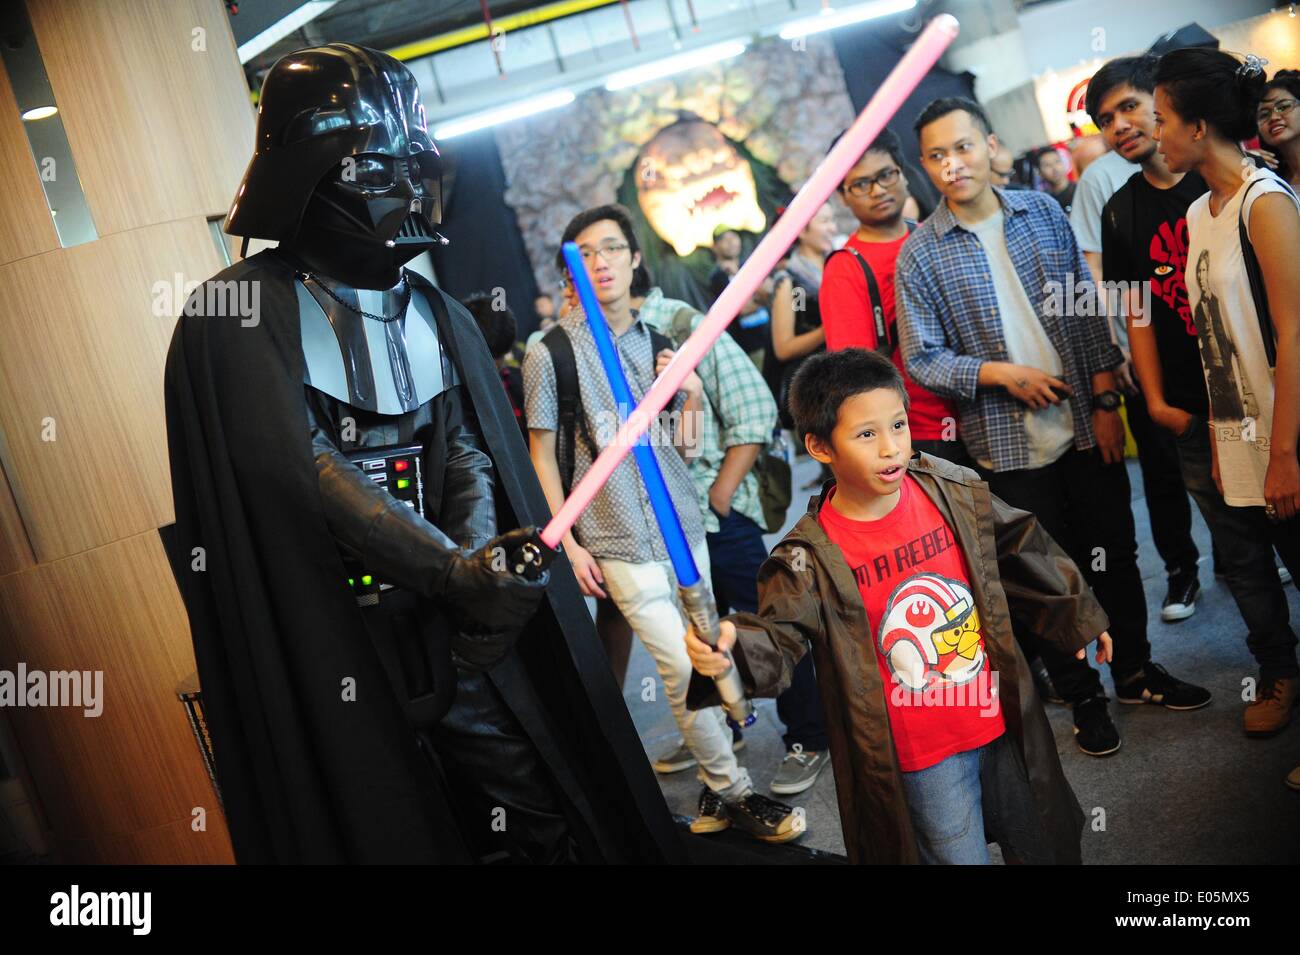 Jakarta, Indonesia. 3rd May, 2014. Fans dressed as Star Wars movie characters pose during the Star Wars weekend in Jakarta, Indonesia, May 3, 2014. Credit:  Zulkarnain/Xinhua/Alamy Live News Stock Photo